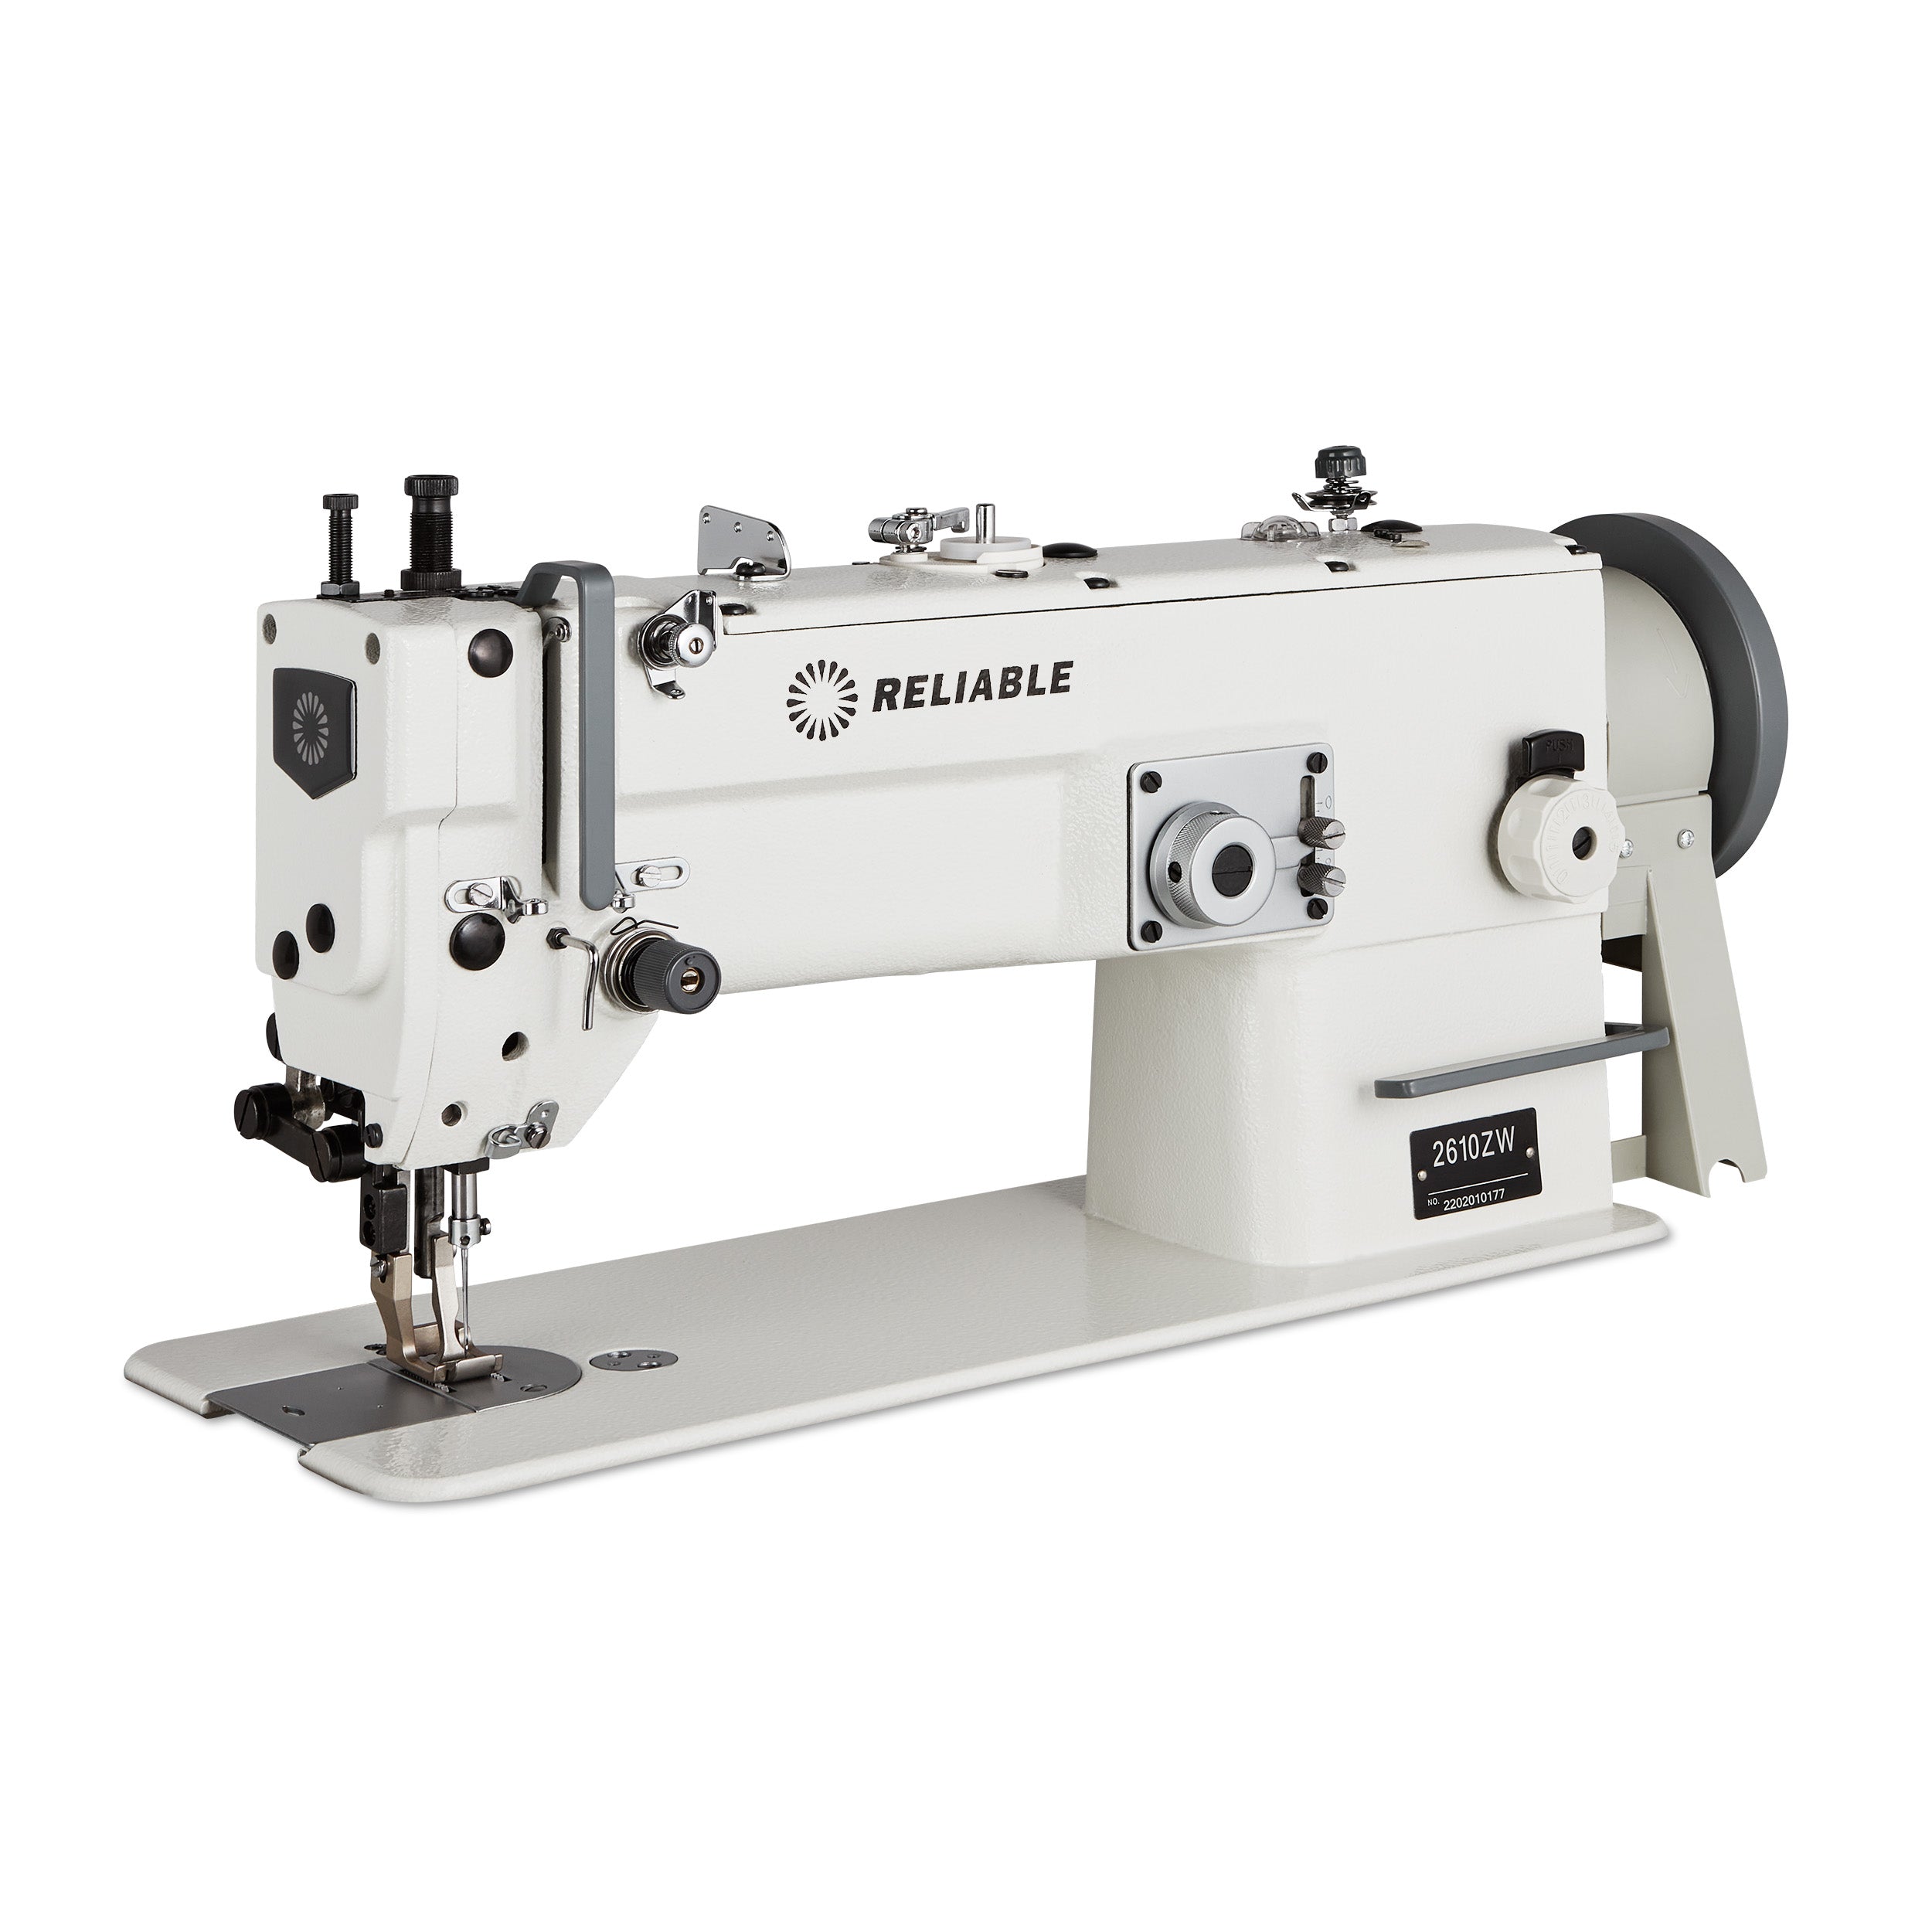 Reliable -2850ZW Zig Zag Walking Foot Long Arm Sewing Machine 